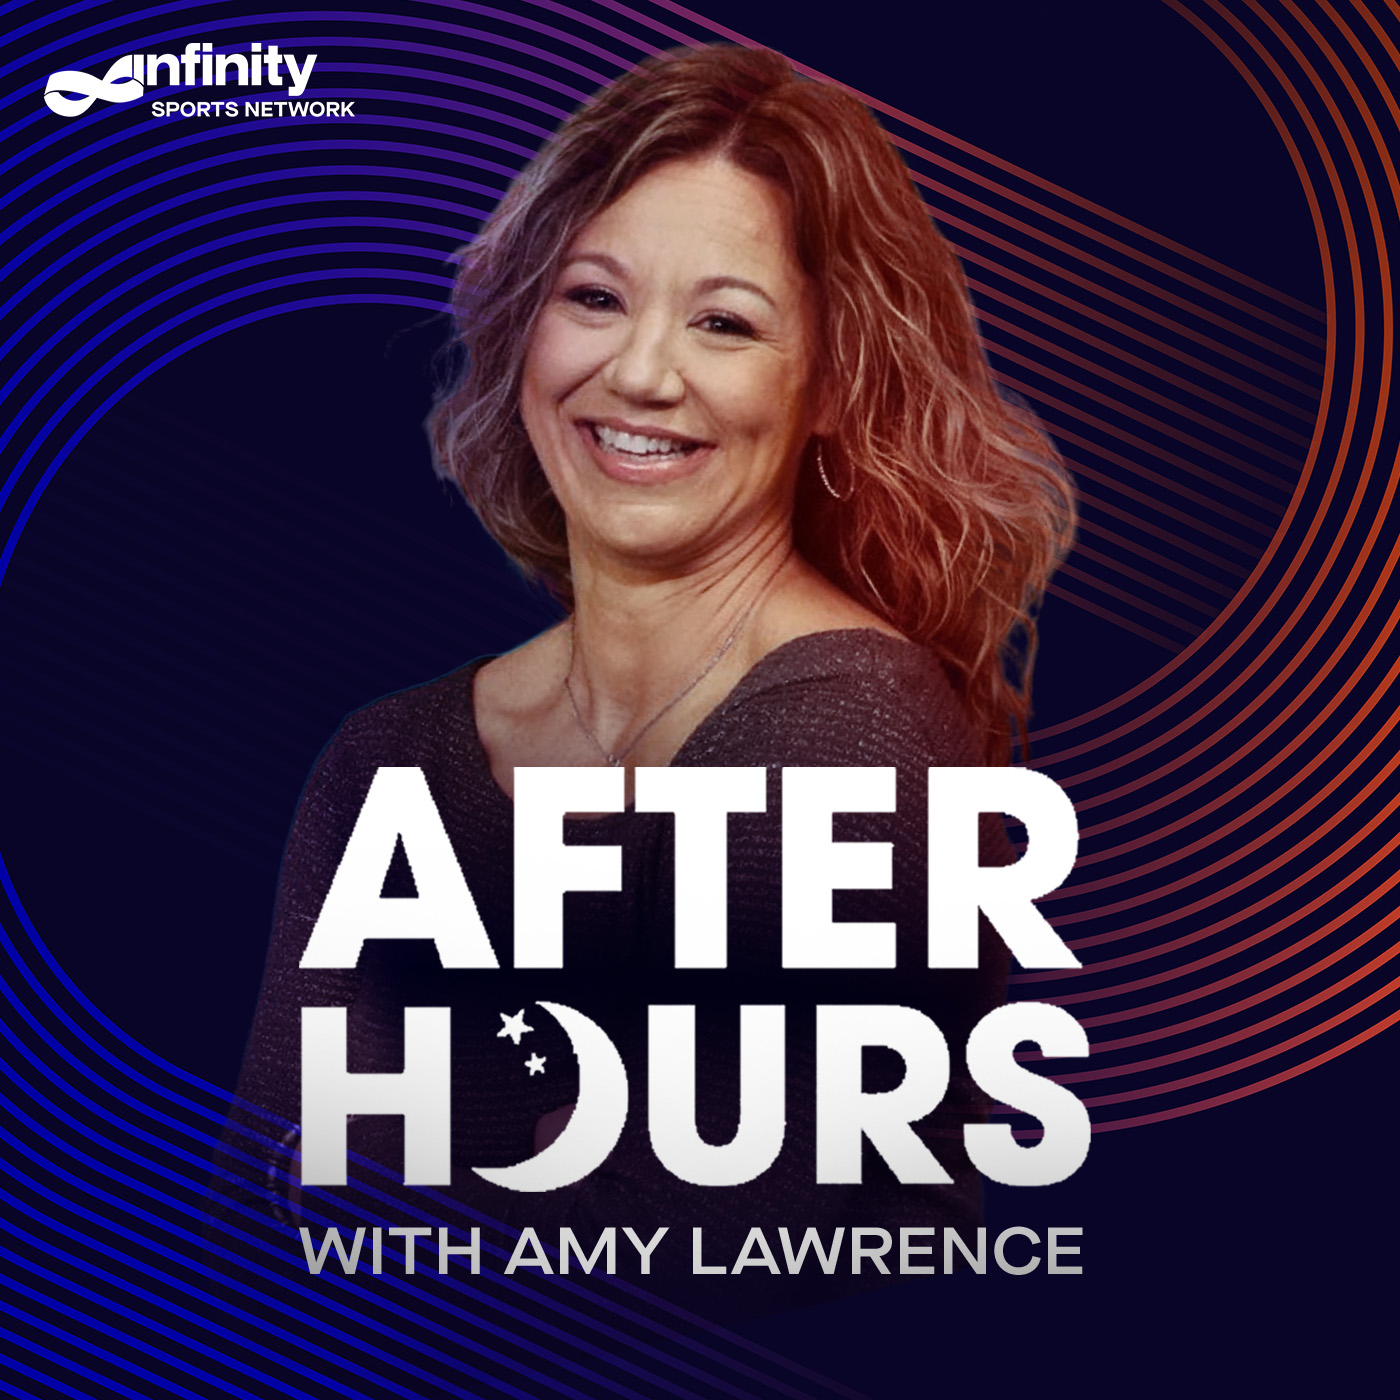 5/17/21 After Hours with Amy Lawrence PODCAST: Hour 3